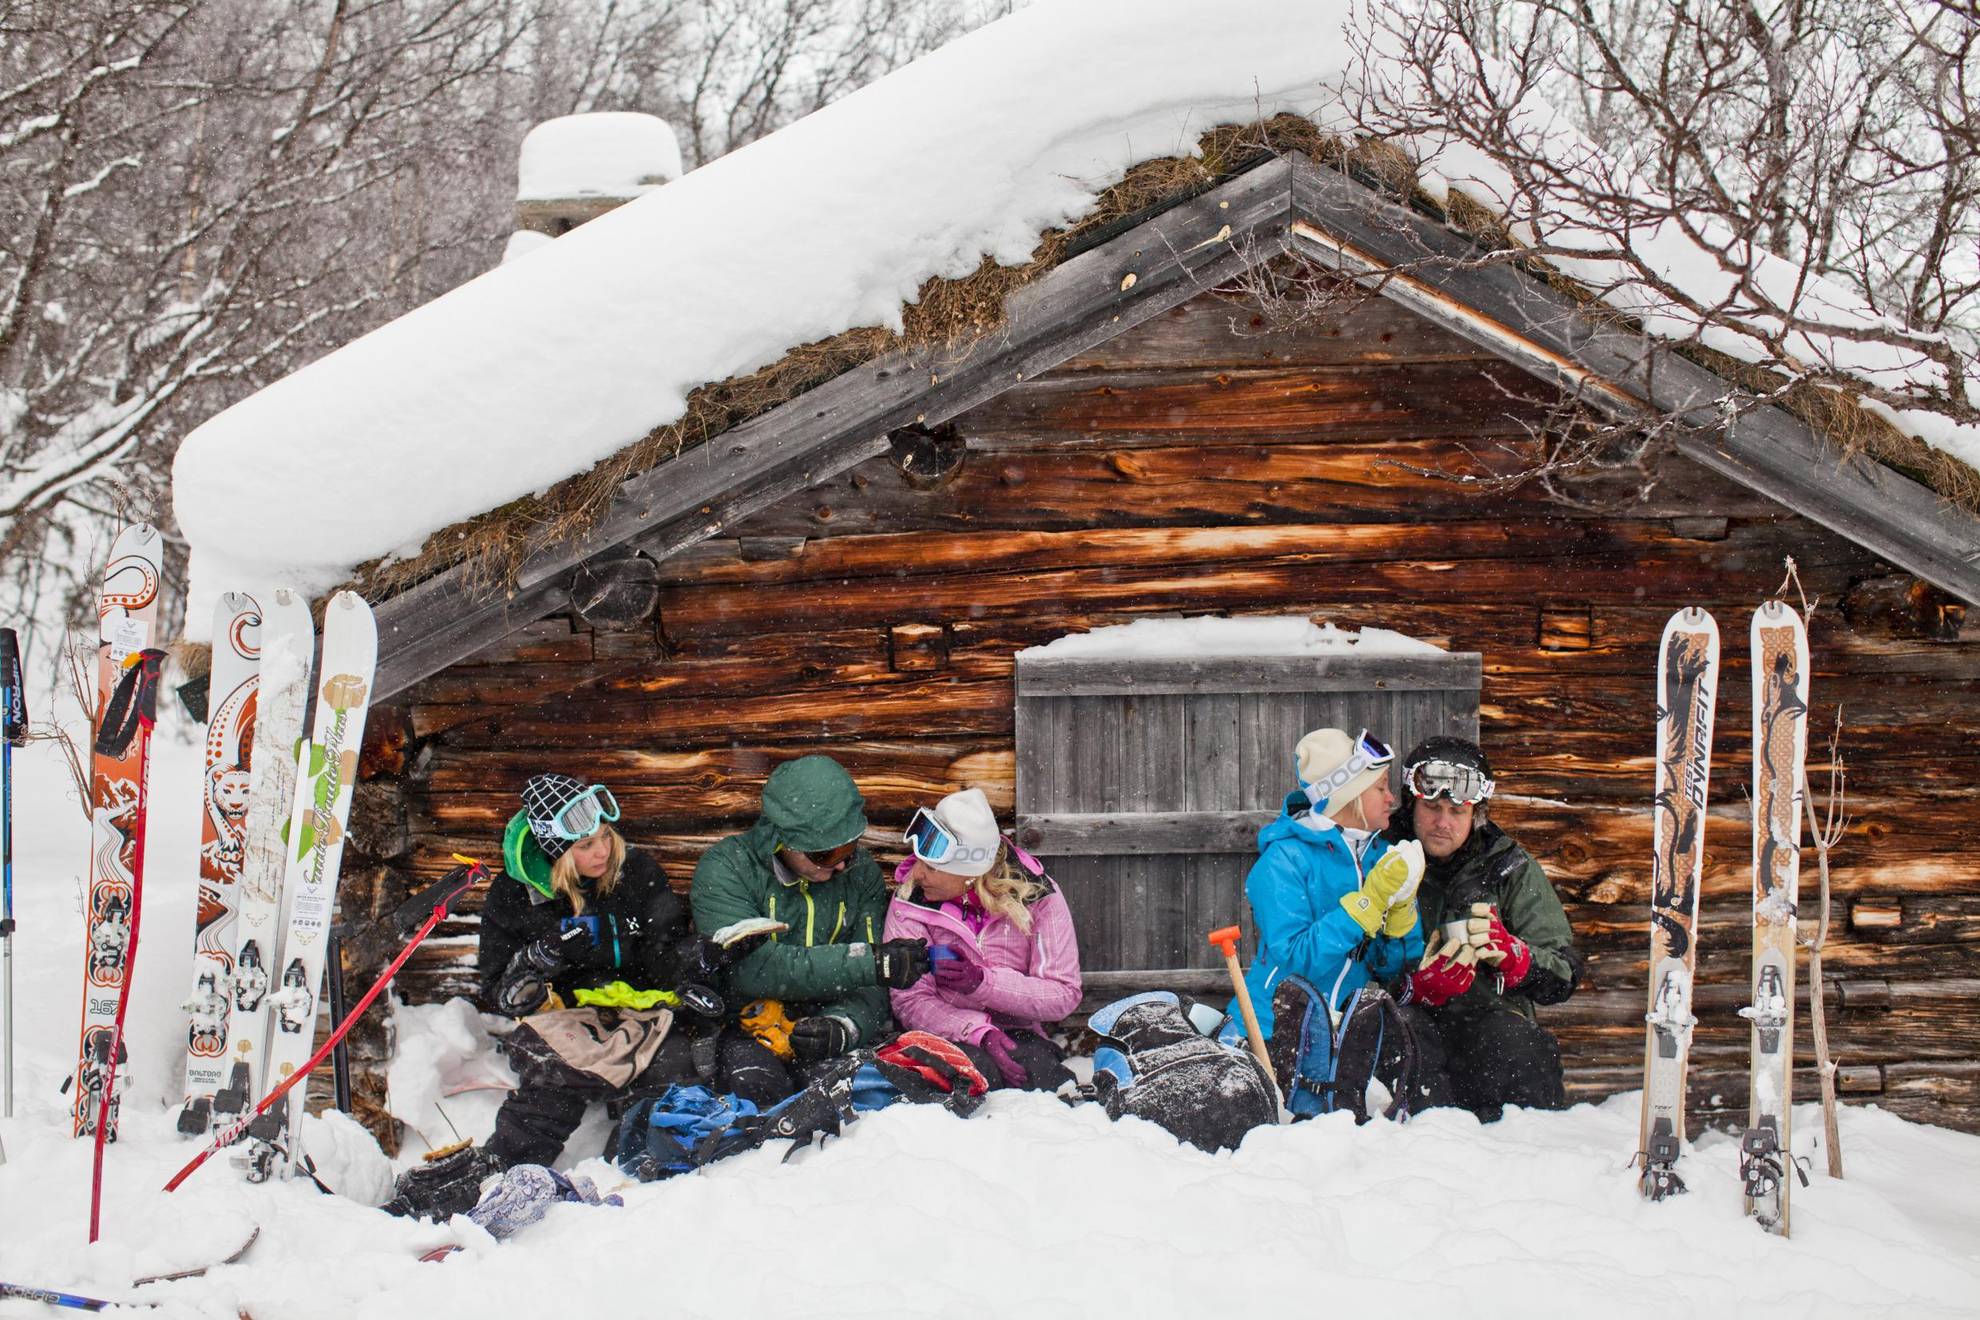 Five people are sitting in the snow in front of a wooden house in the mountains and having a coffee break from skiing.